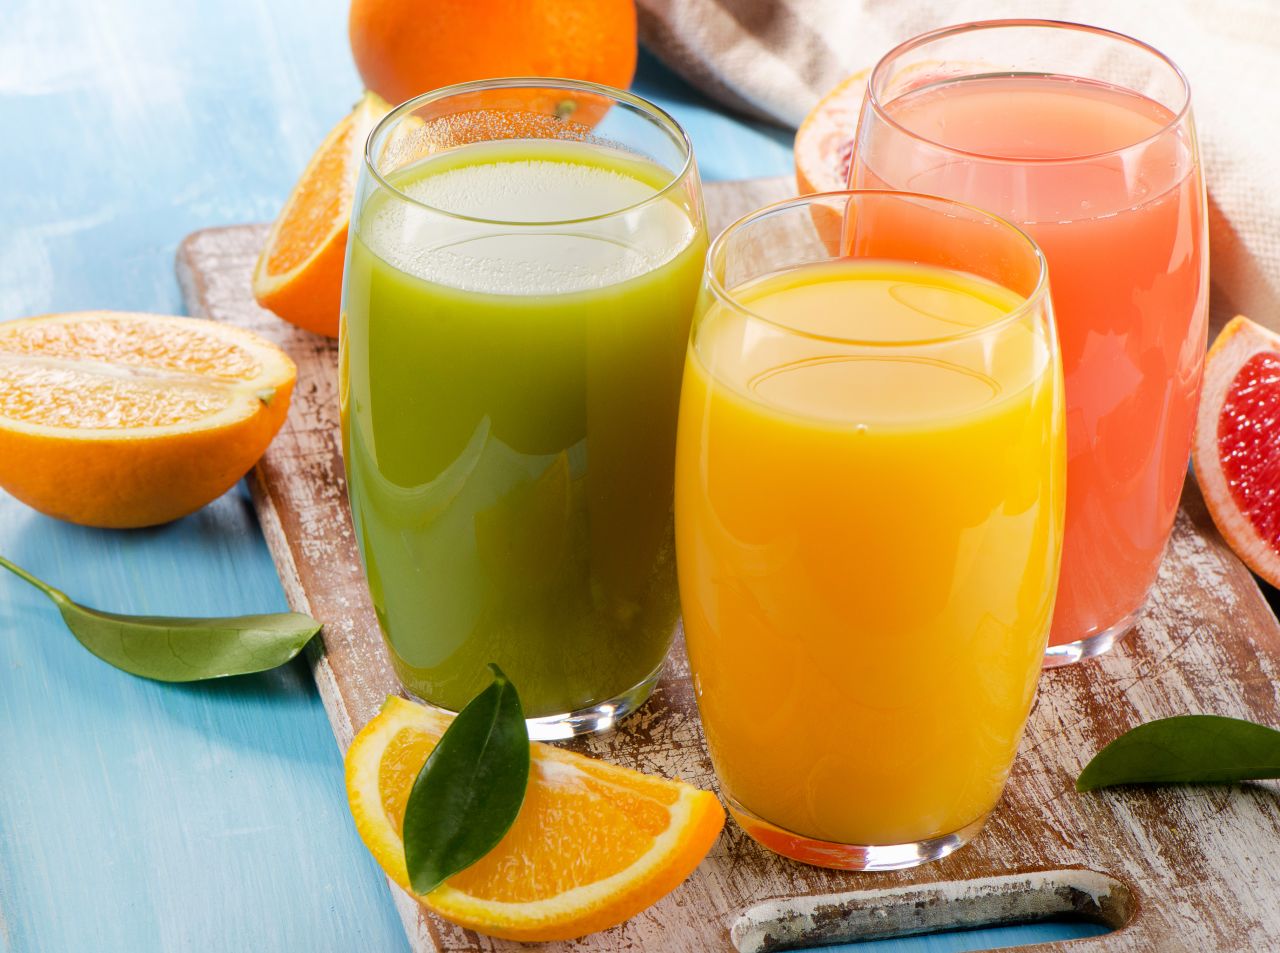 Citrus juices account for 14.3% of young people's fruit intake, researchers said.<br />